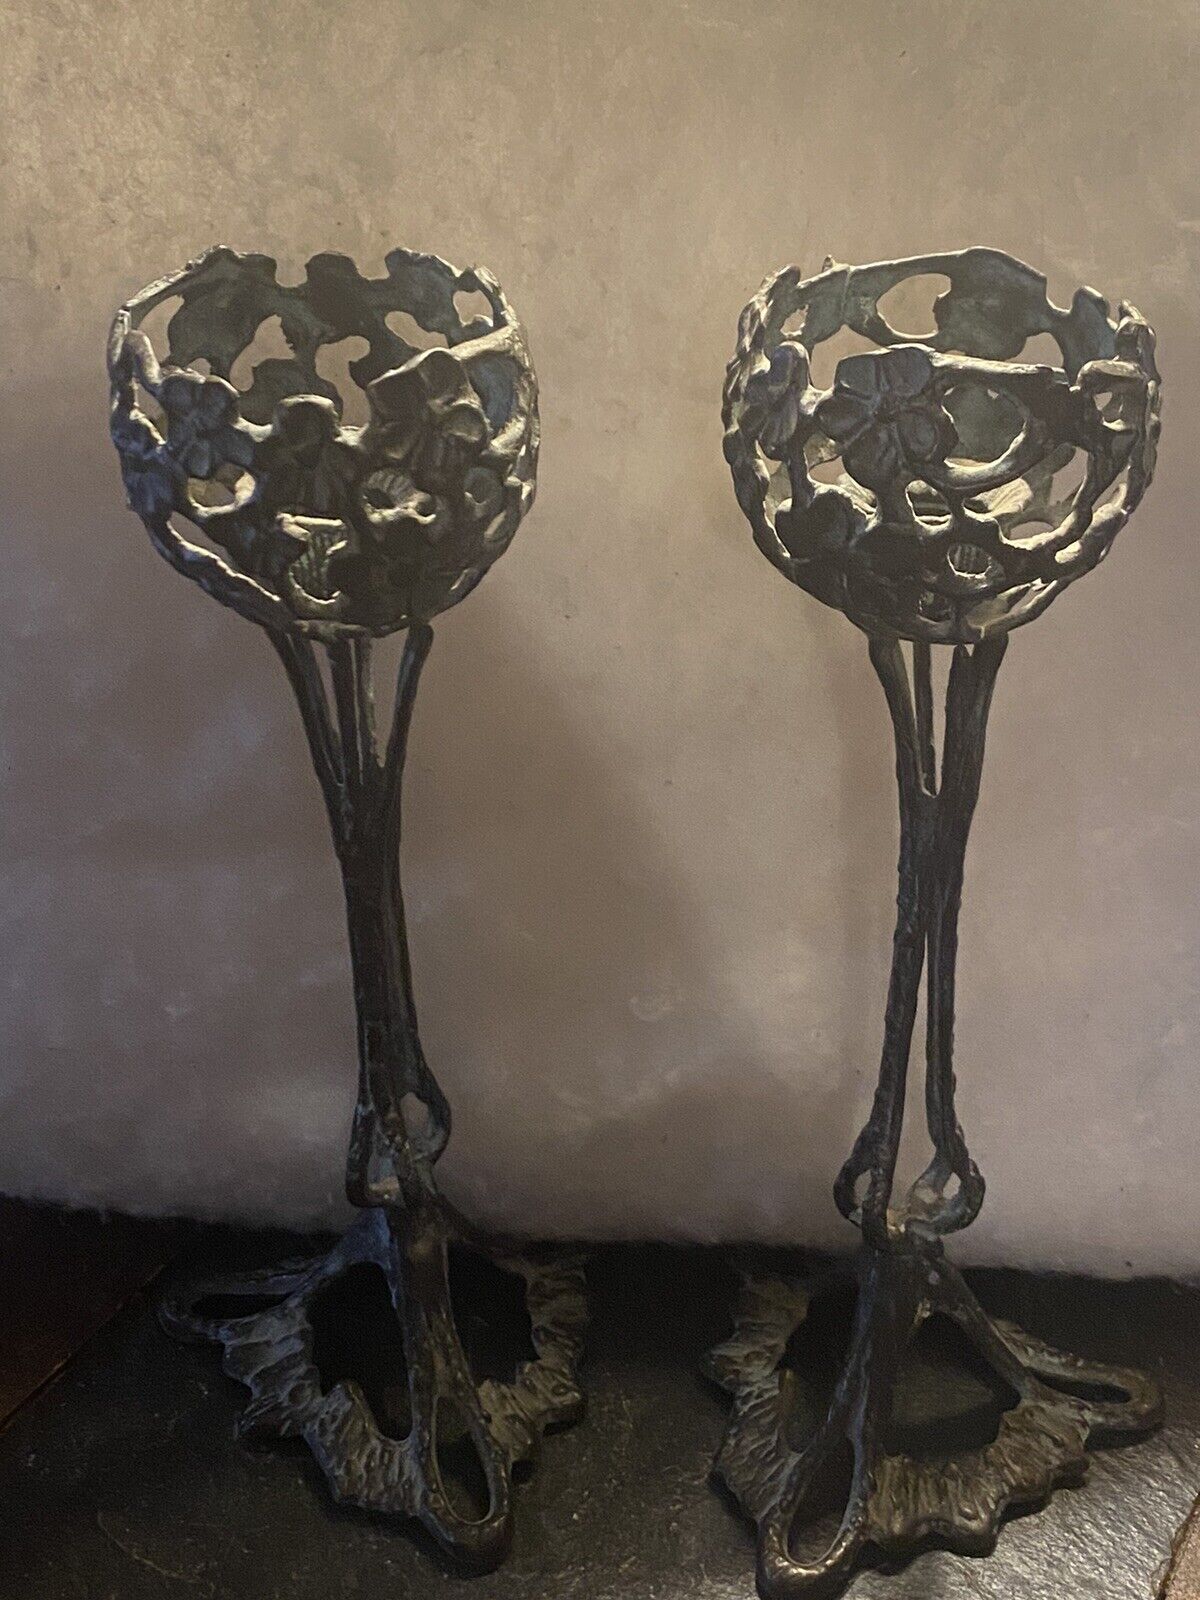 Pair of Vintage Brass Candle Holders “Roughly 10” Height”